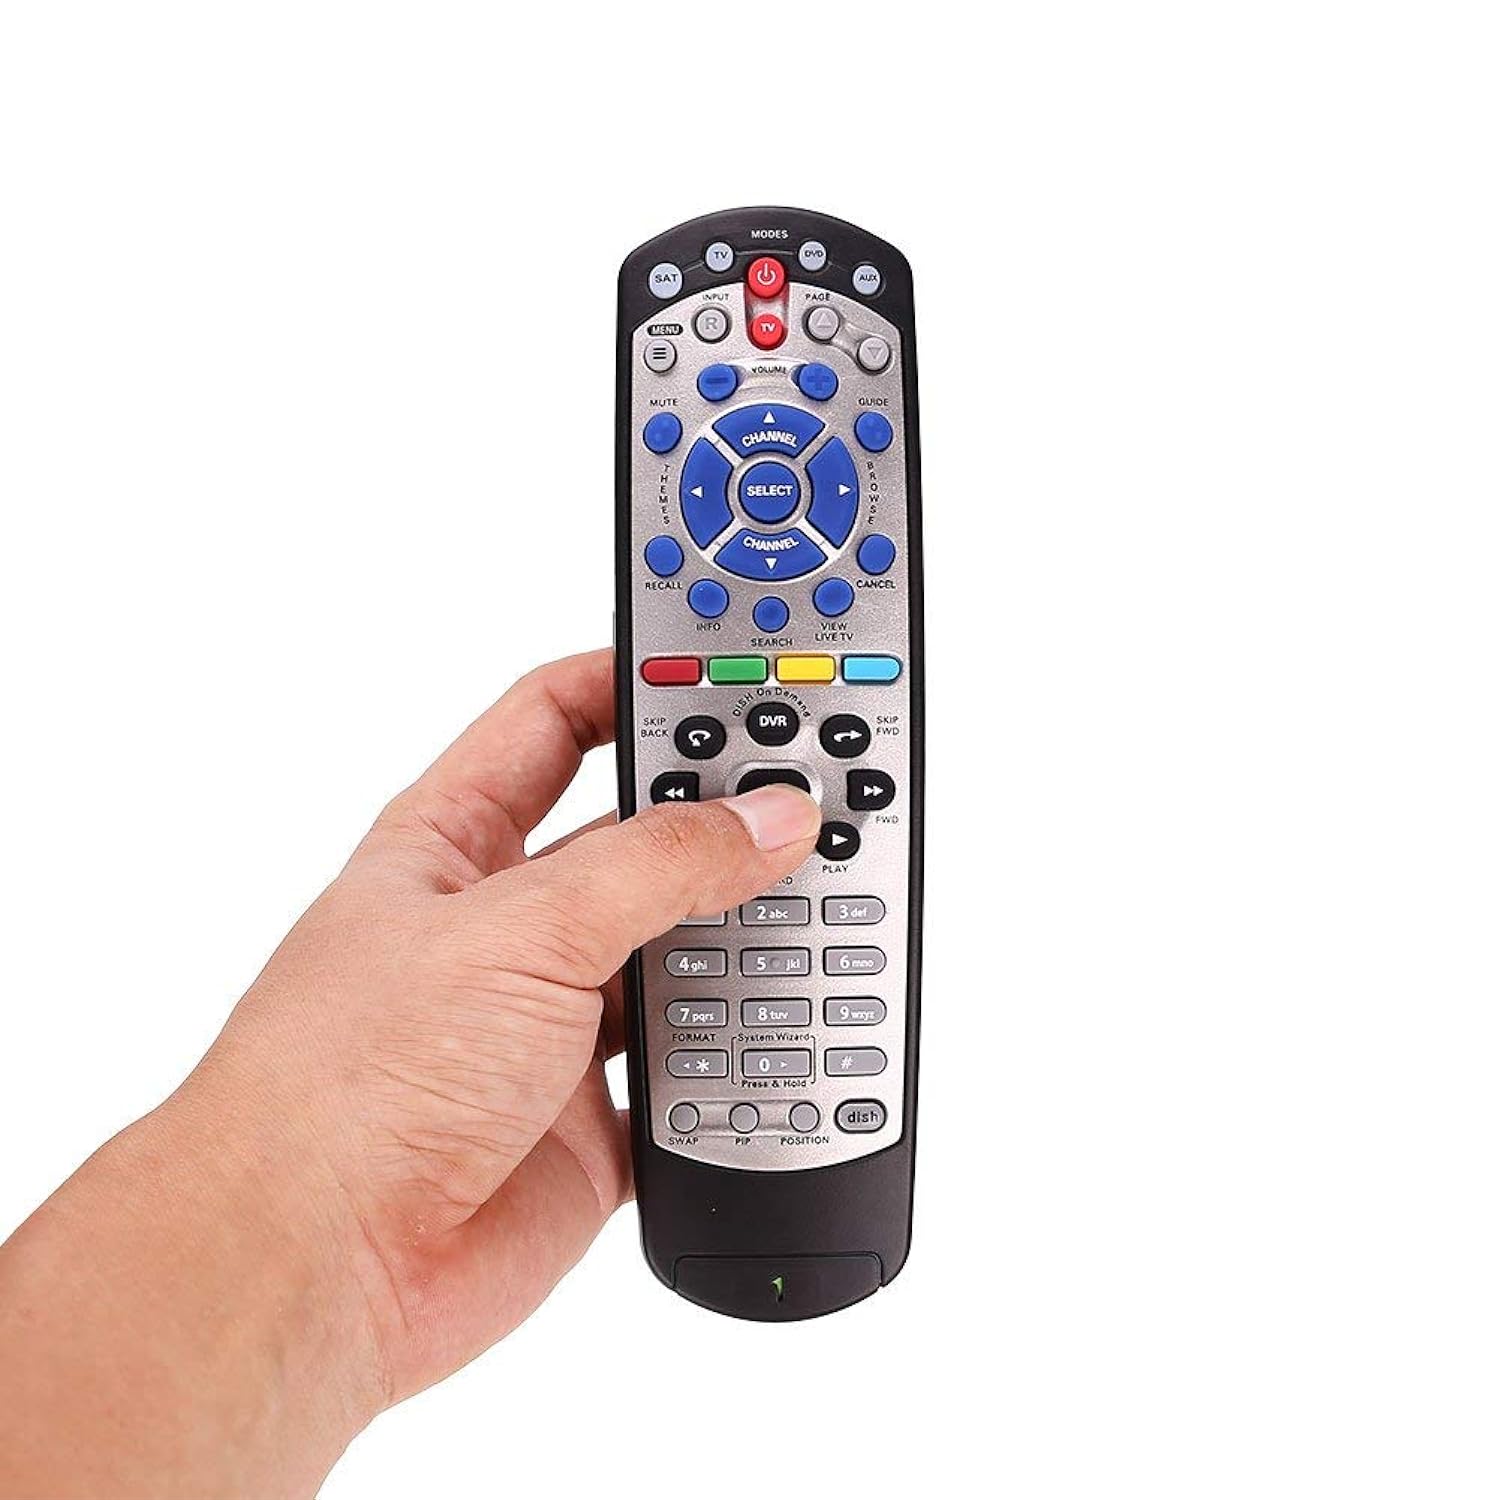 thinkstar New Replacement Remote Control For Dish Network Remote Control Tv1#1 Satellite Receiver Expressvu Dish 20.0